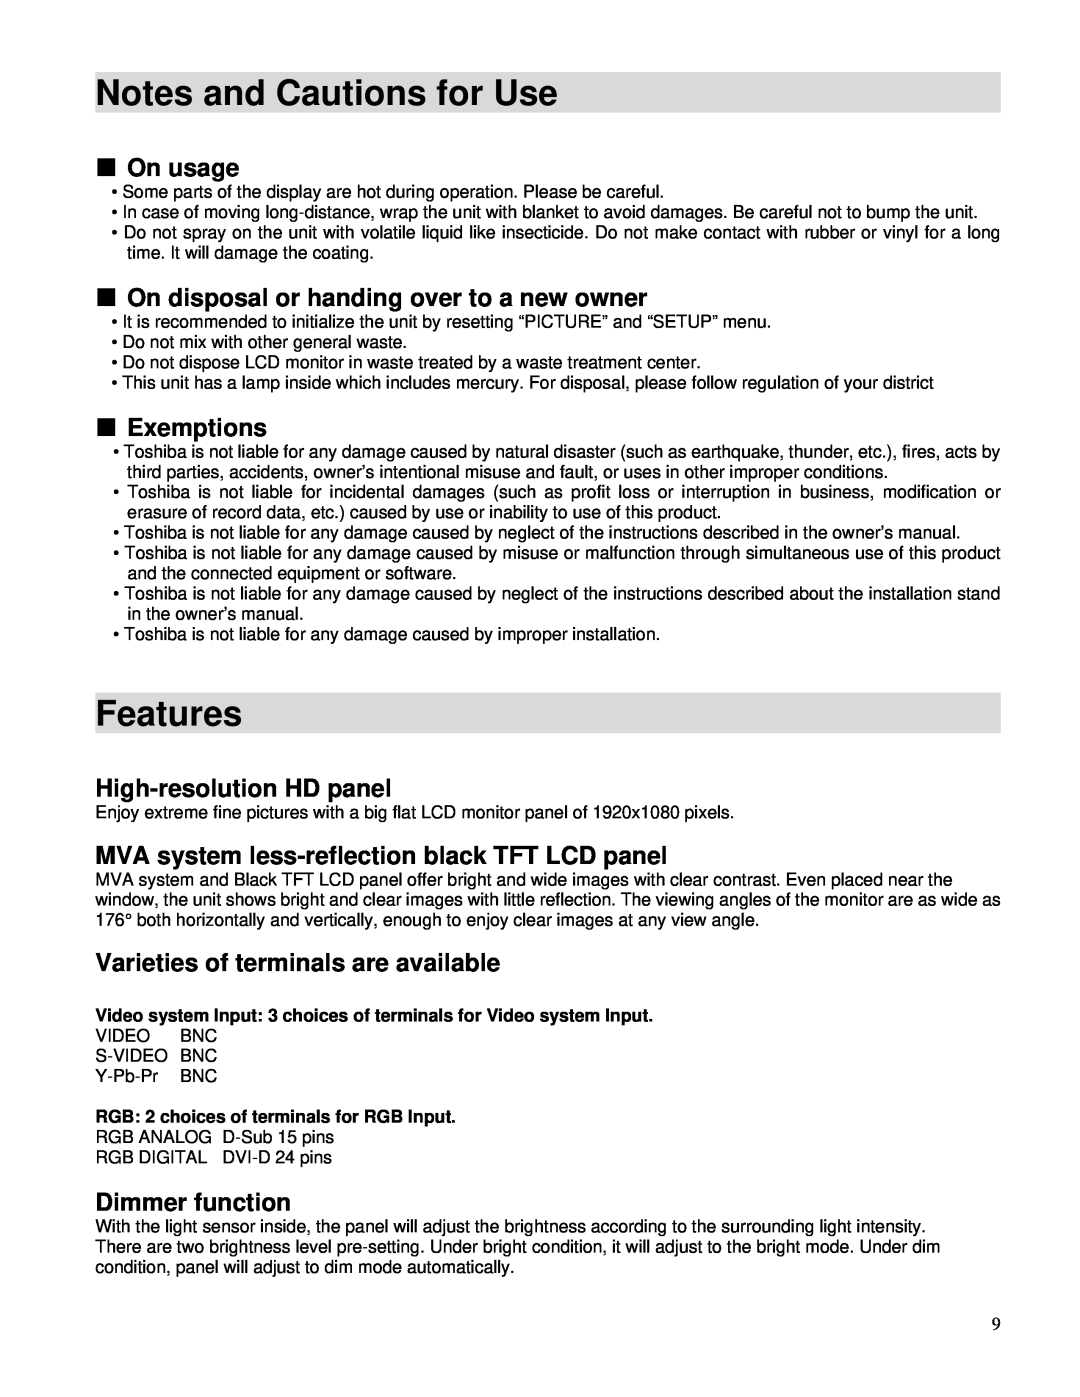 Toshiba P42LHA Notes and Cautions for Use, Features, On usage, On disposal or handing over to a new owner, Exemptions 